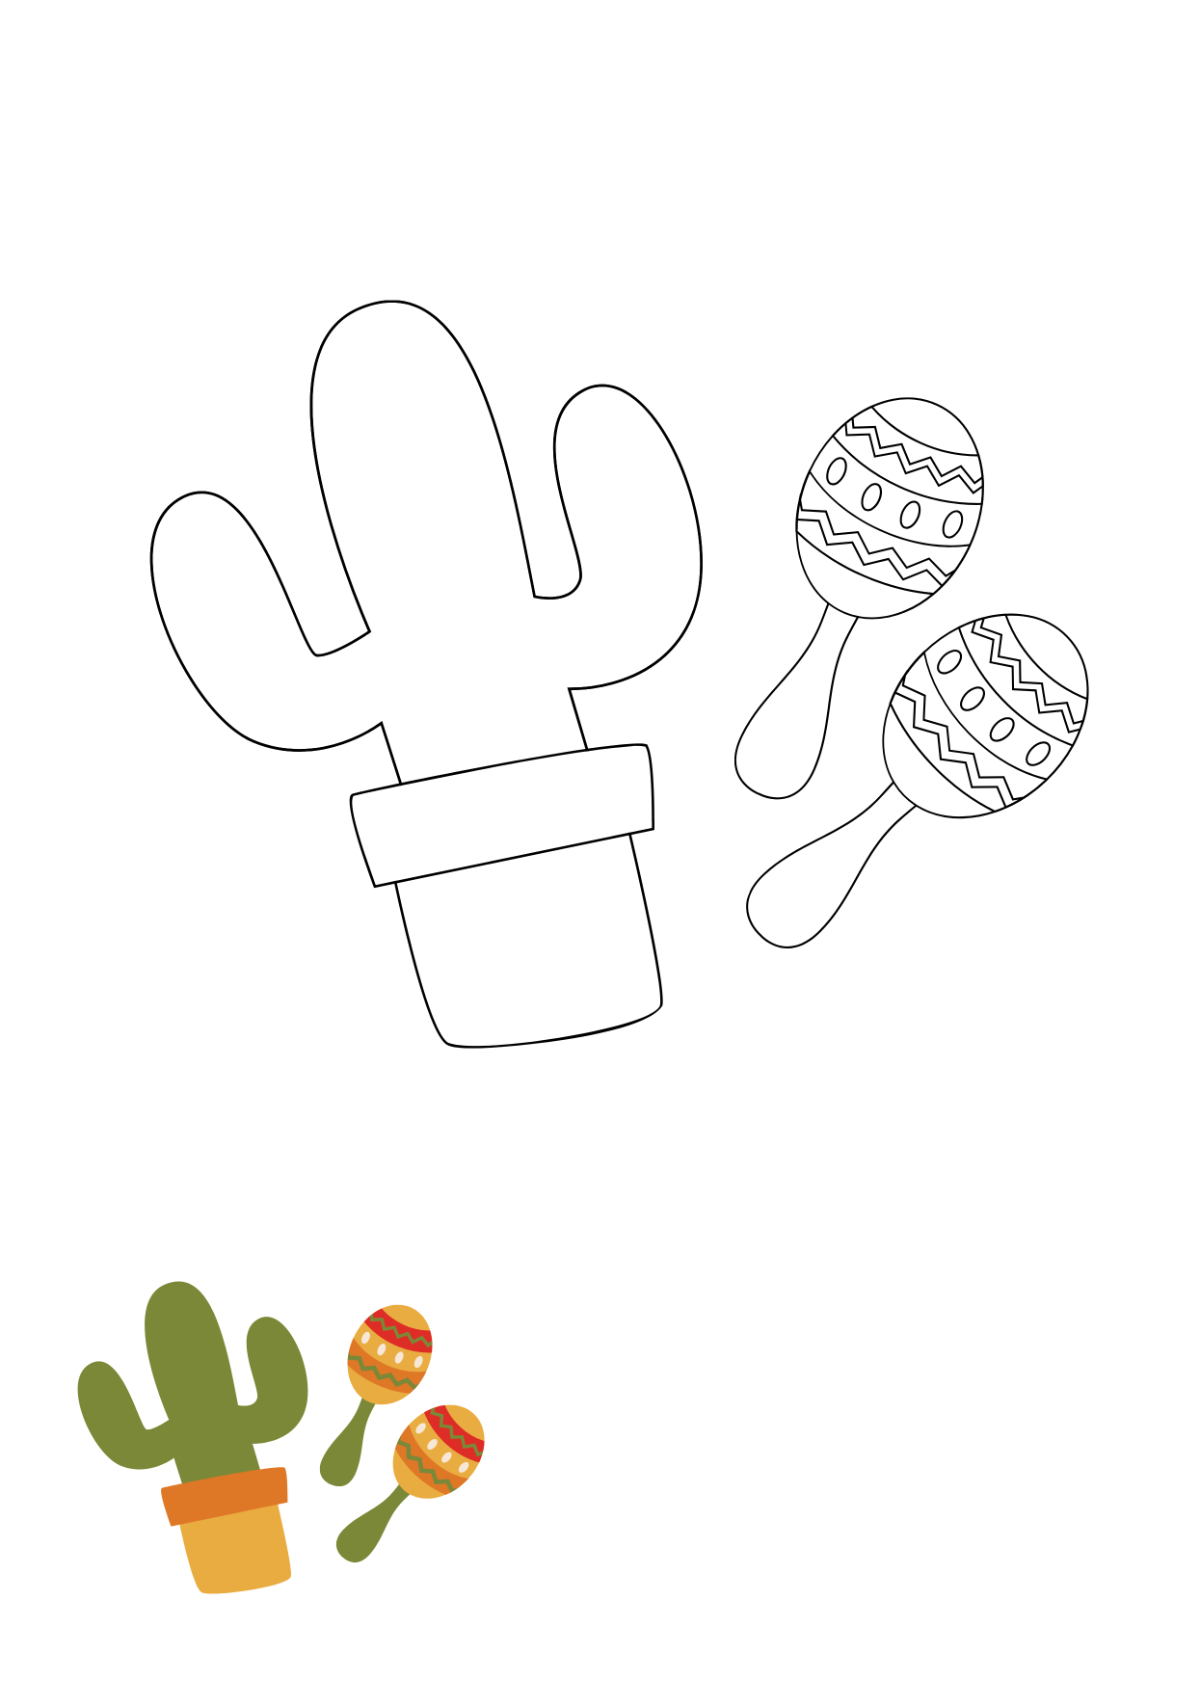 Free Cinco De Mayo Coloring Page for kids Template